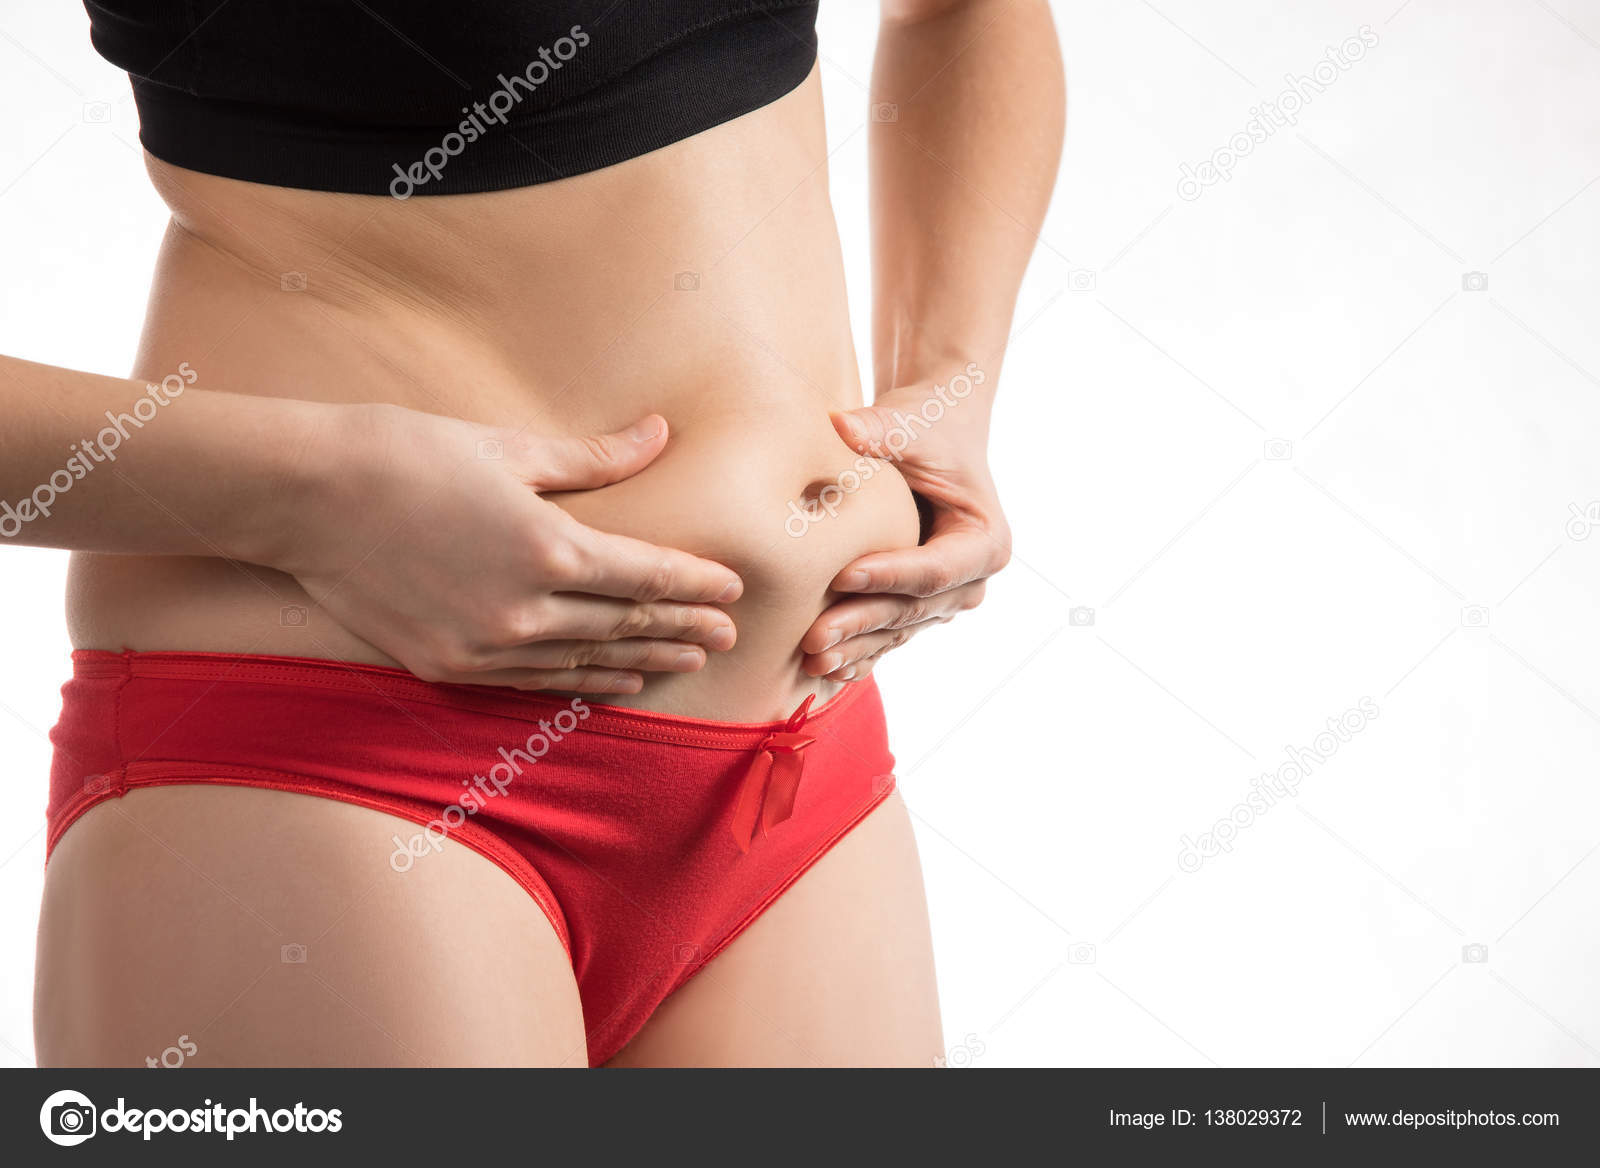 The girl in a red underwear to touch the fat on your stomach and